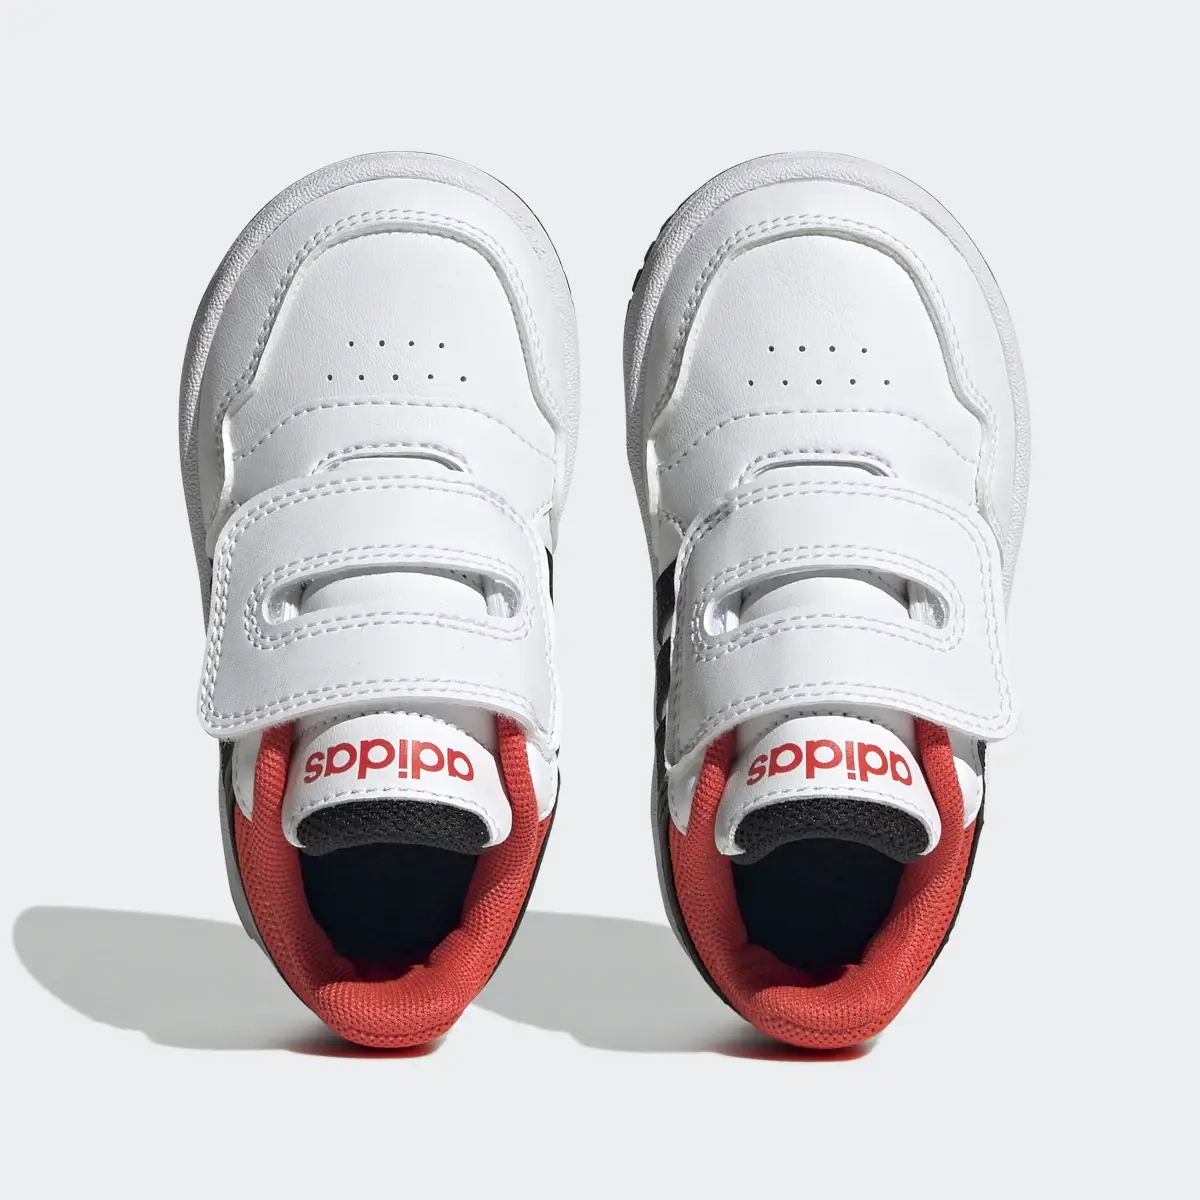 Adidas Hoops Shoes. 3